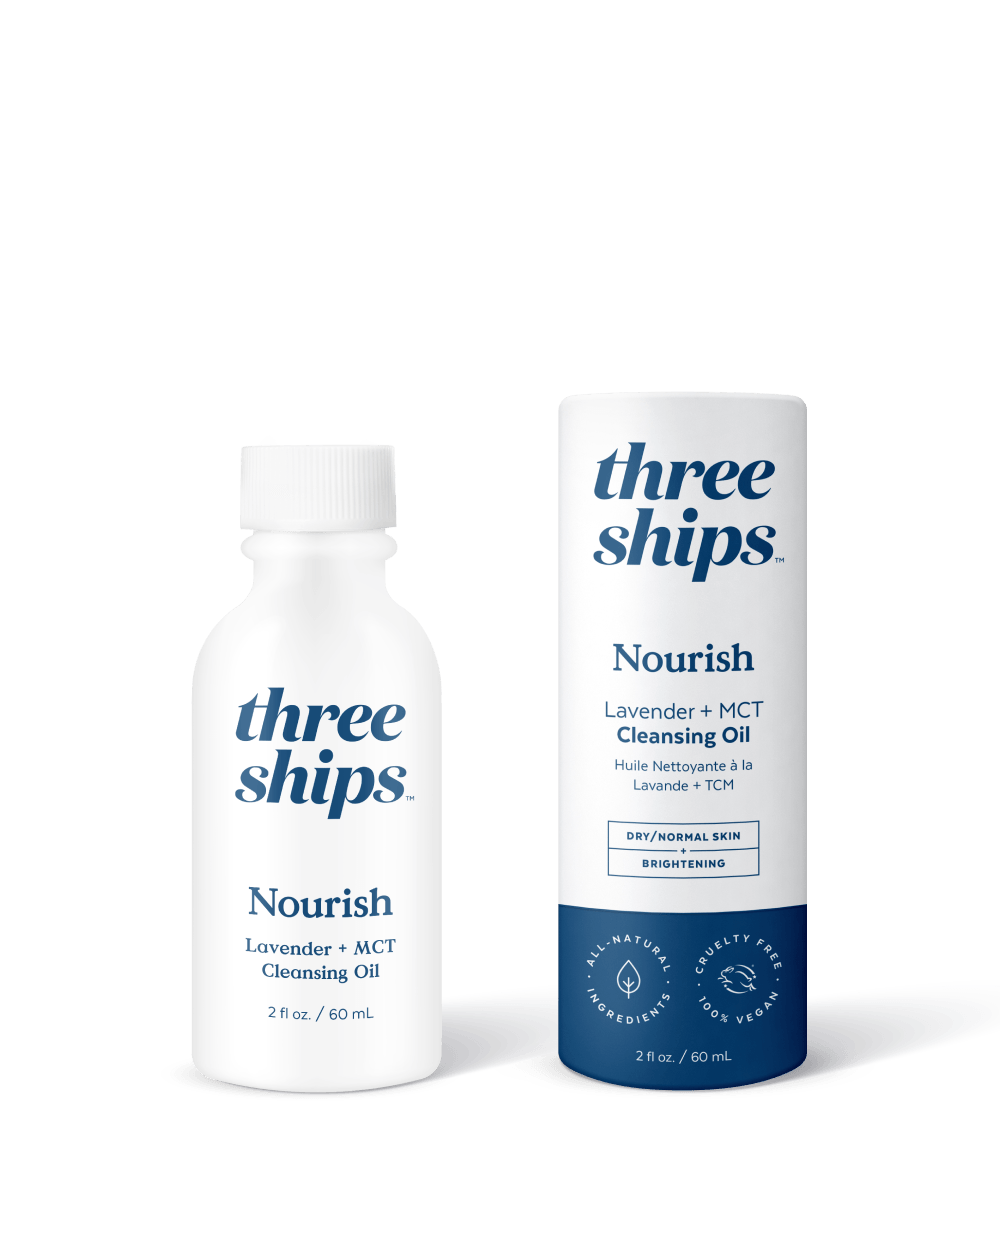 Nourish Lavender + MCT Cleansing Oil - Three Ships Beauty - Consumerhaus